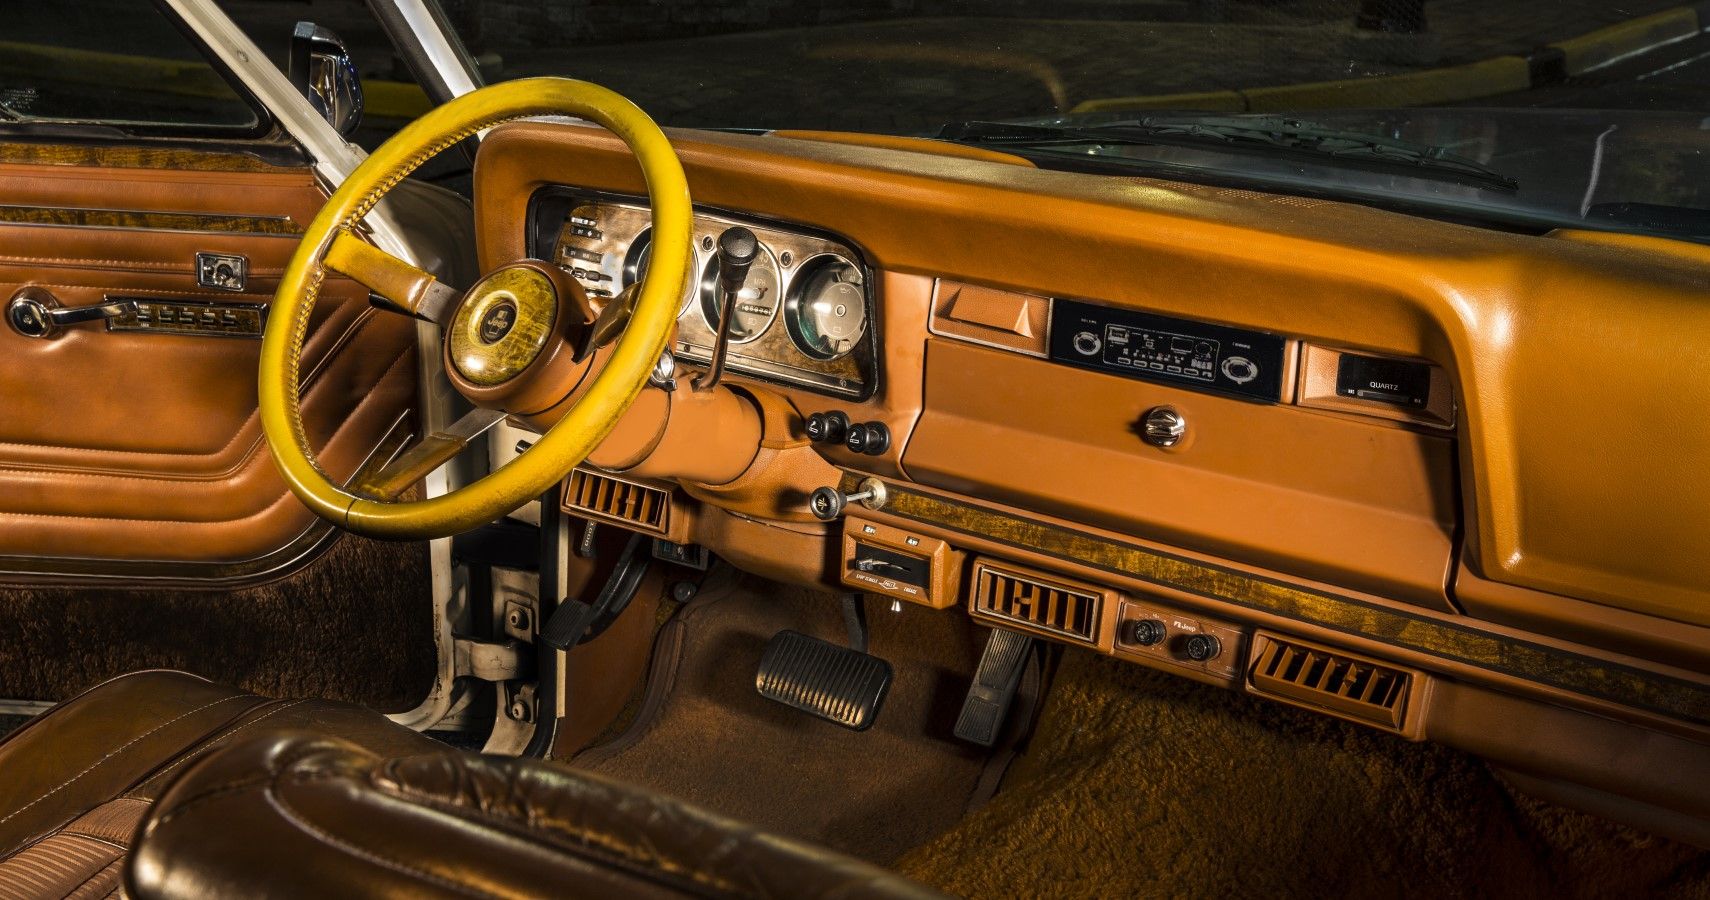 1963 Jeep Wagoneer interior layout view